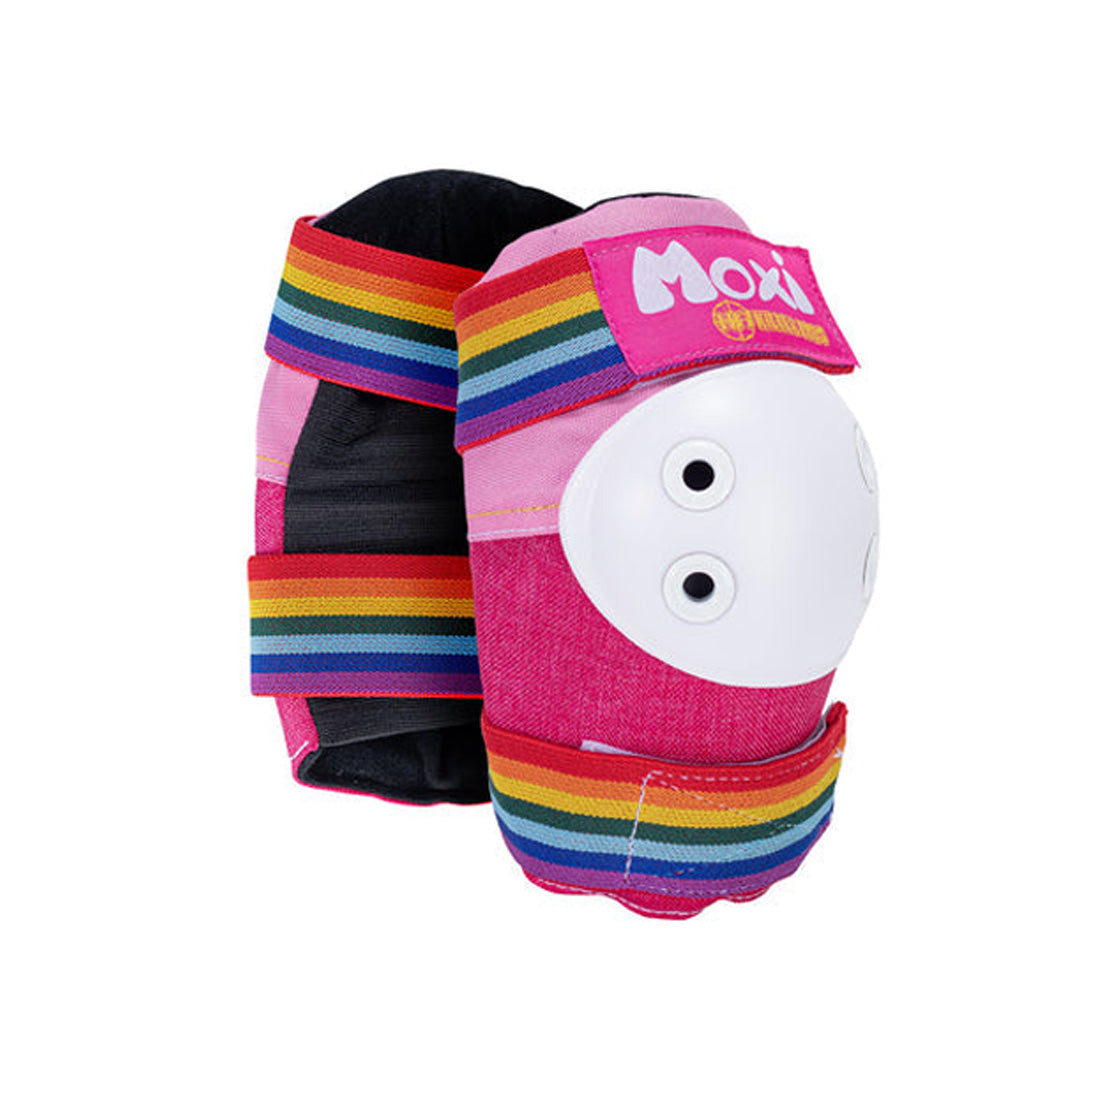 187 Six-Pack Youth - Moxi Pink Protective Gear